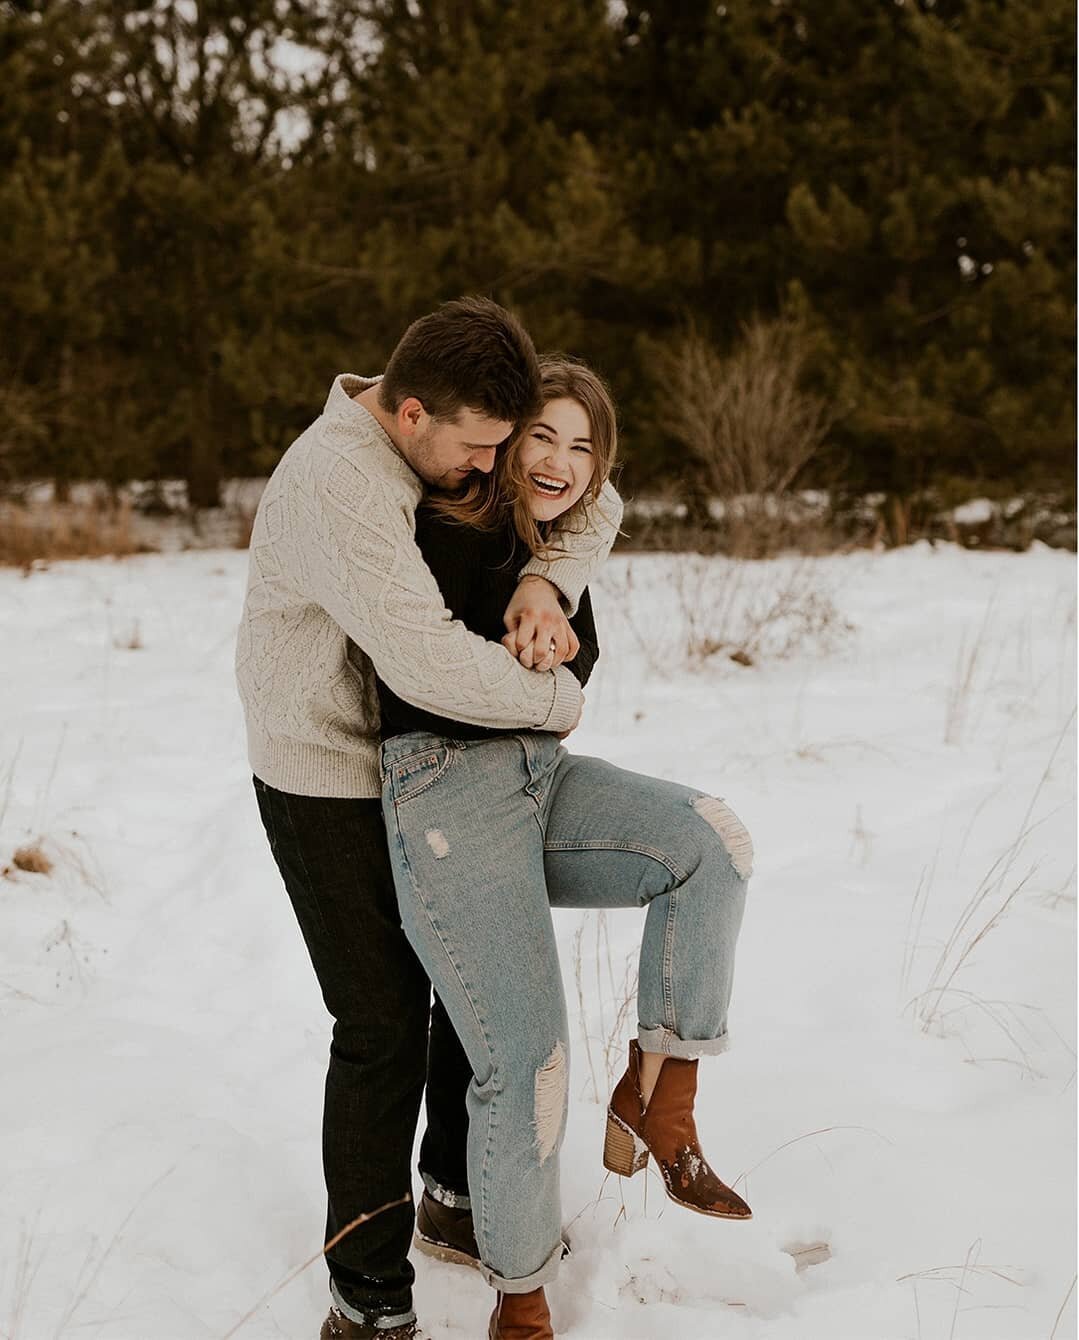 It's already the first week of February and that feels just craaaaaazy to me! January was PACKED with engagement sessions and meeting so many of my incredible couples I get to walk alongside this year as they step into marriage has been the most beau